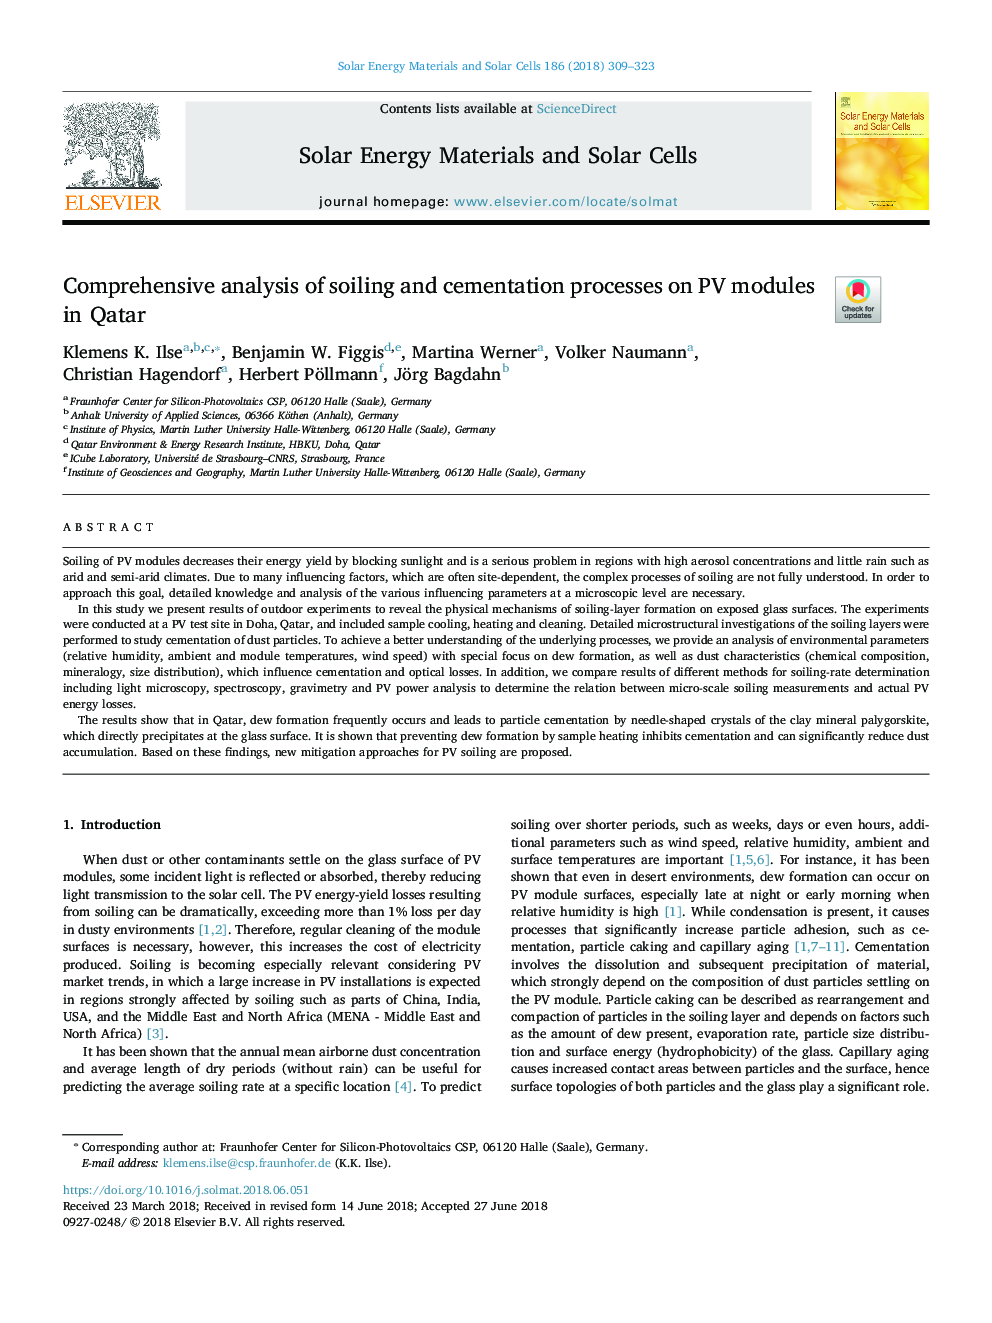 Comprehensive analysis of soiling and cementation processes on PV modules in Qatar